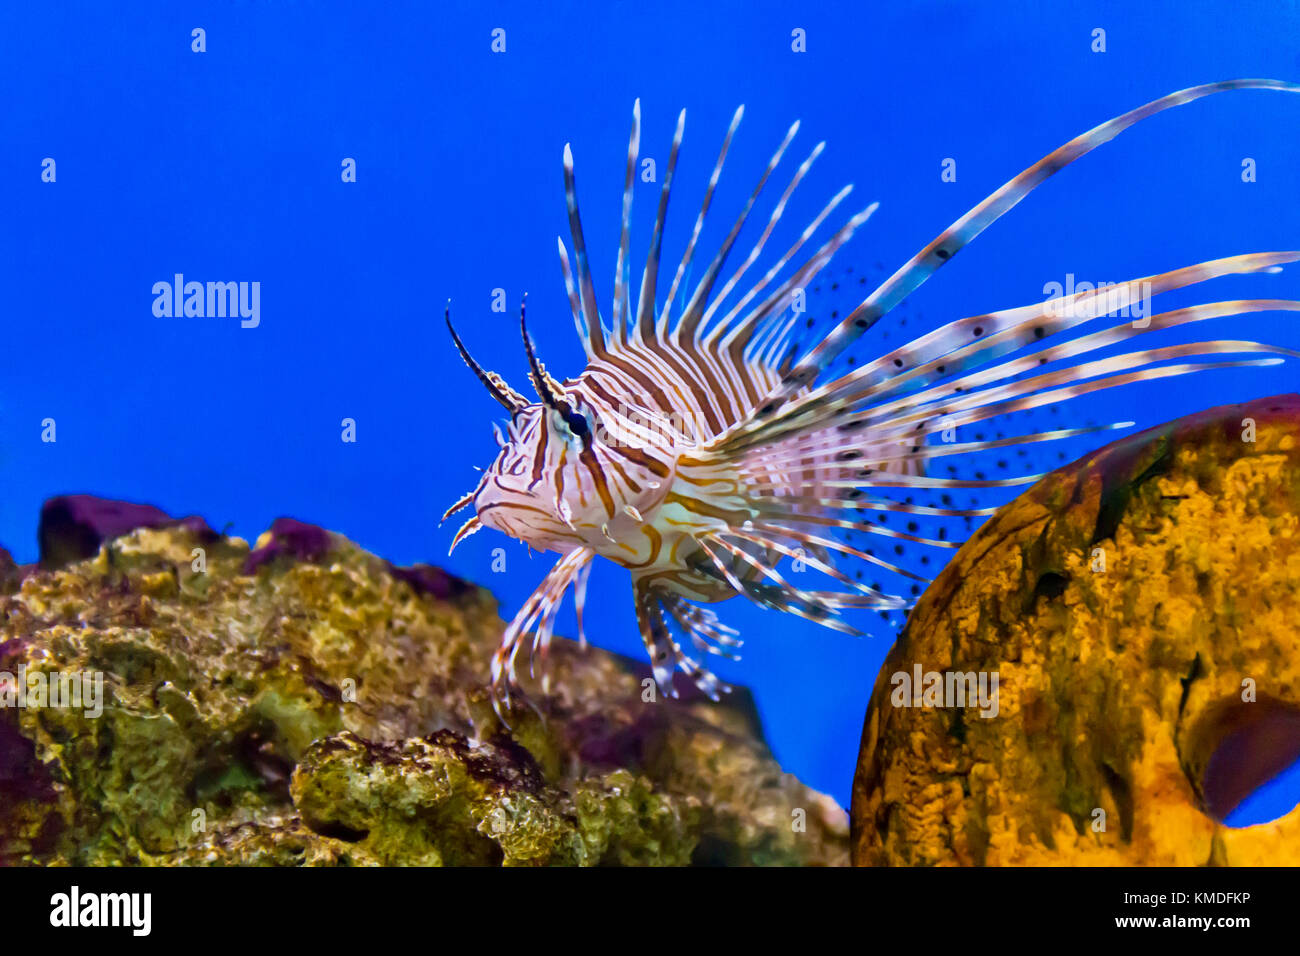 One large pterois volitans fish with spikes and stripes in blue salt water  Stock Photo - Alamy